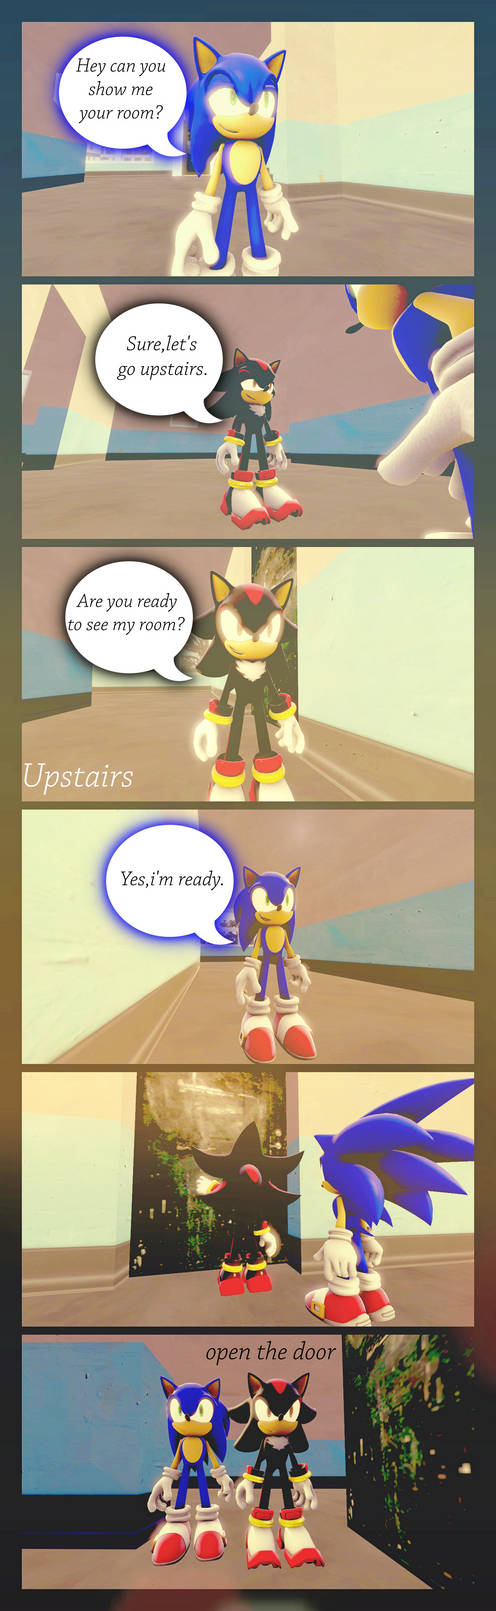 Sonic and Shadow by pihulovessonic21 on DeviantArt